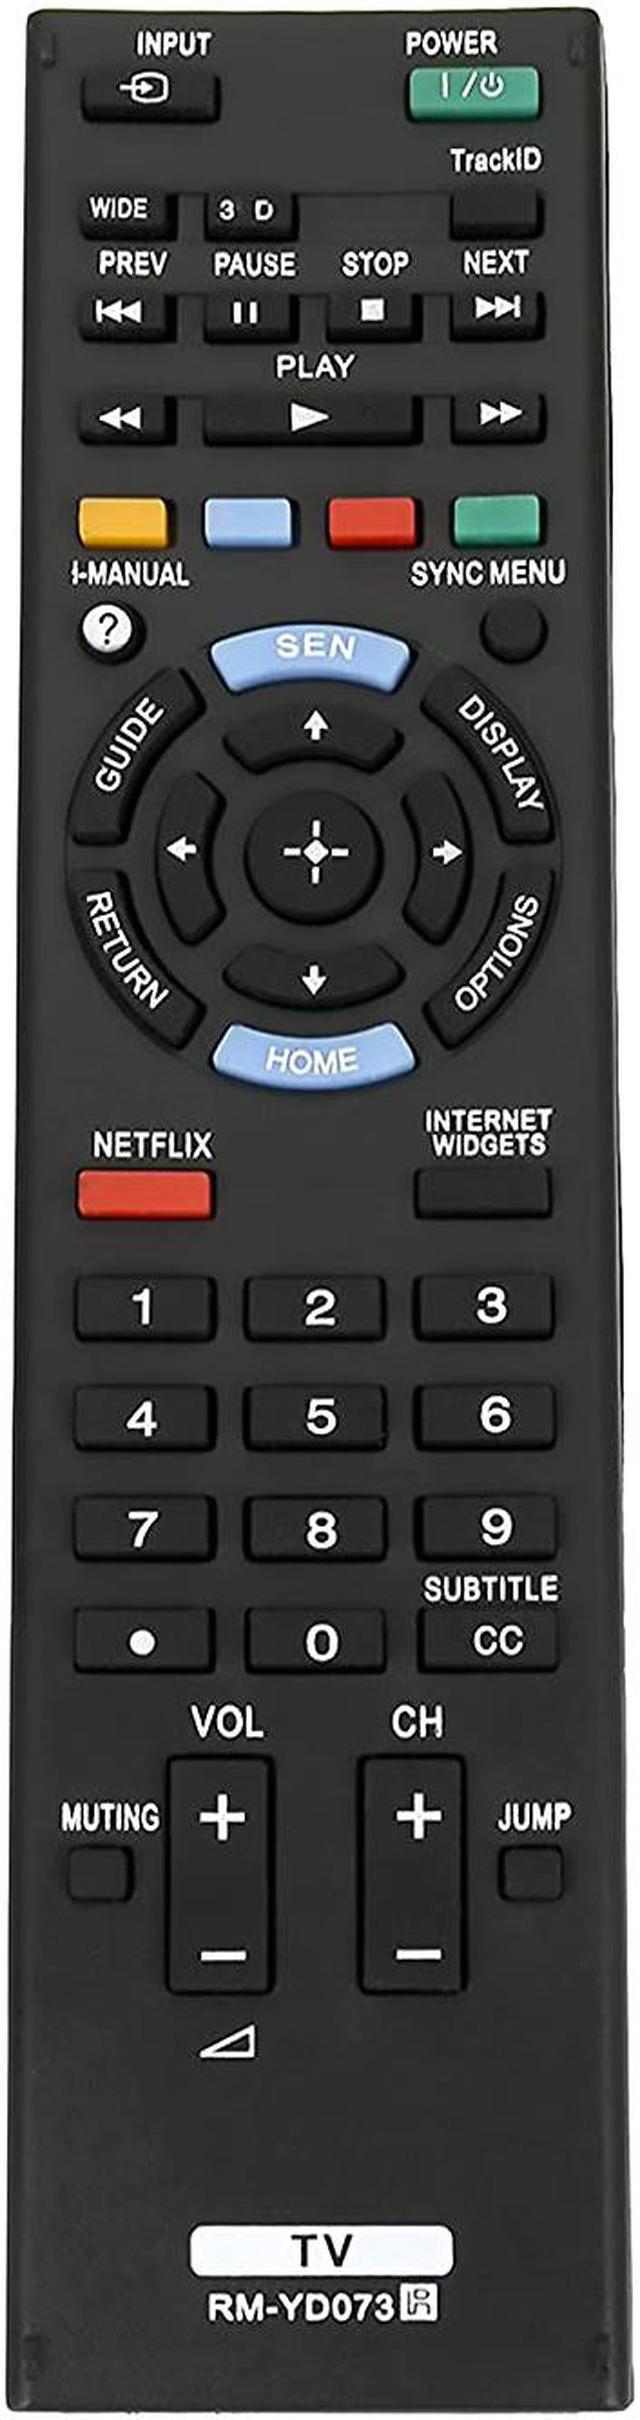 New RM-YD073 Replace Remote fit for Sony BRAVIA TV KDL-46HX750 KDL-40HX750  KDL-32HX750 KDL-46HX751 KDL-46HX850 KDL-55HX750 KDL-55HX751 KDL-55HX850